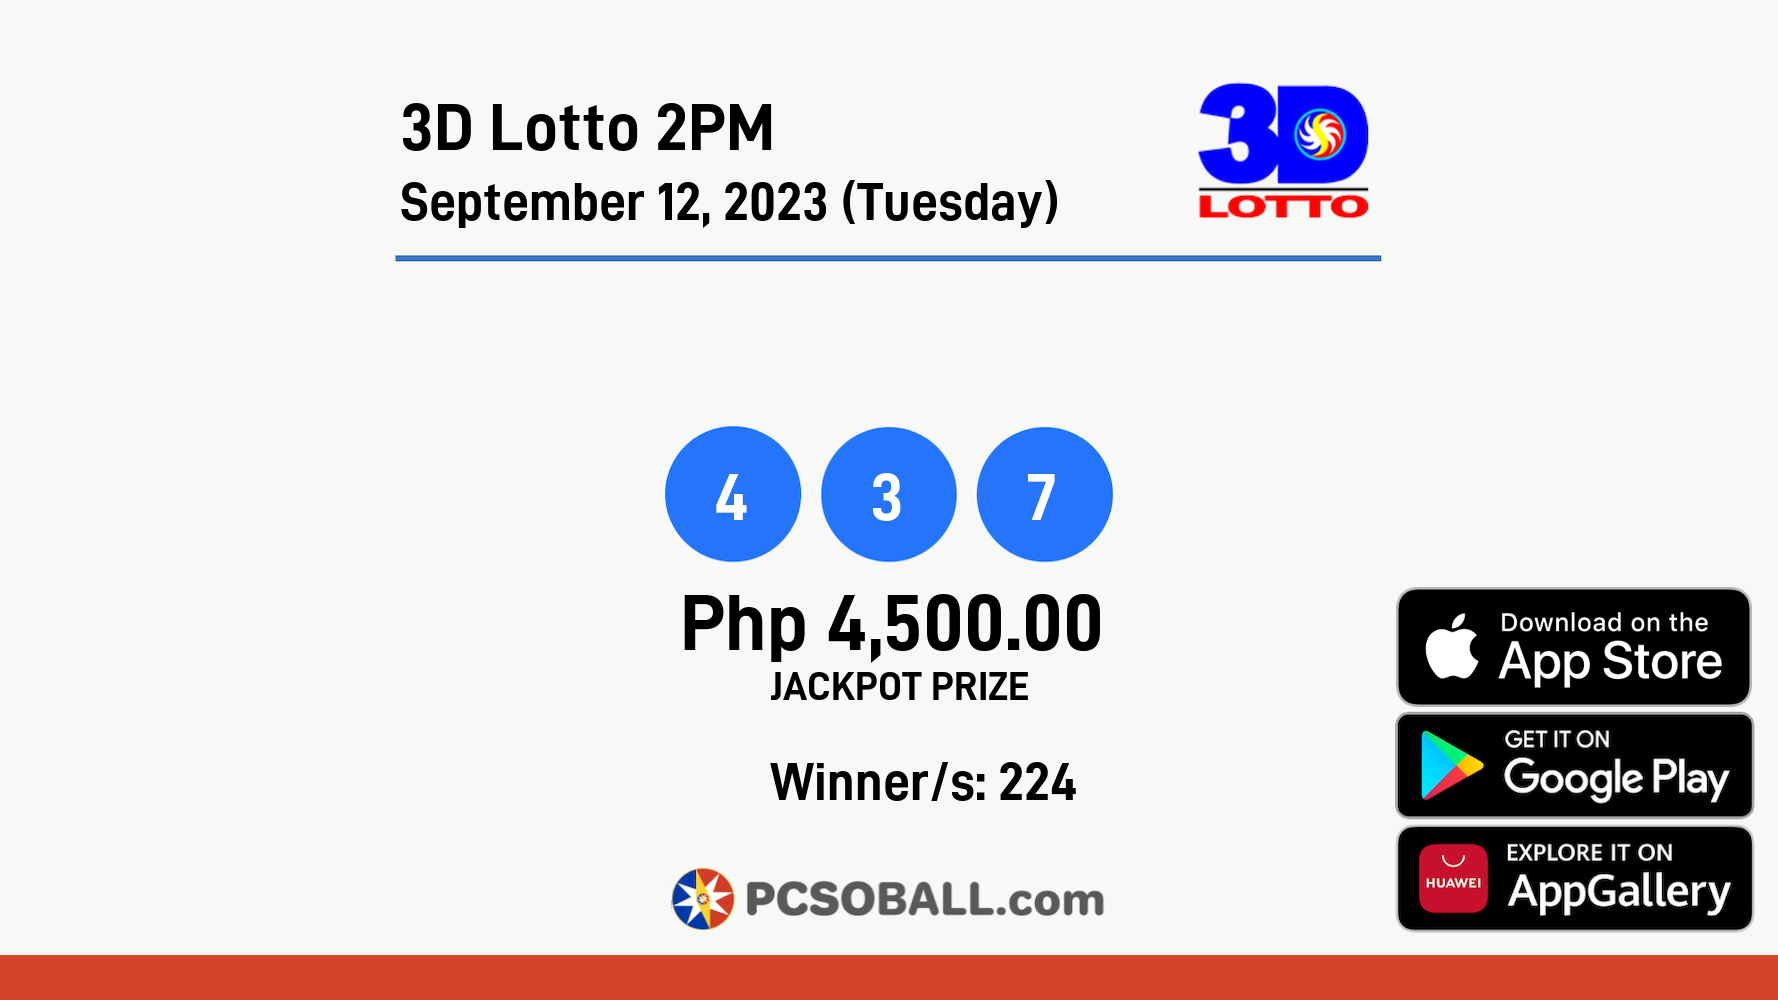 3D Lotto 2PM September 12, 2023 (Tuesday) Result